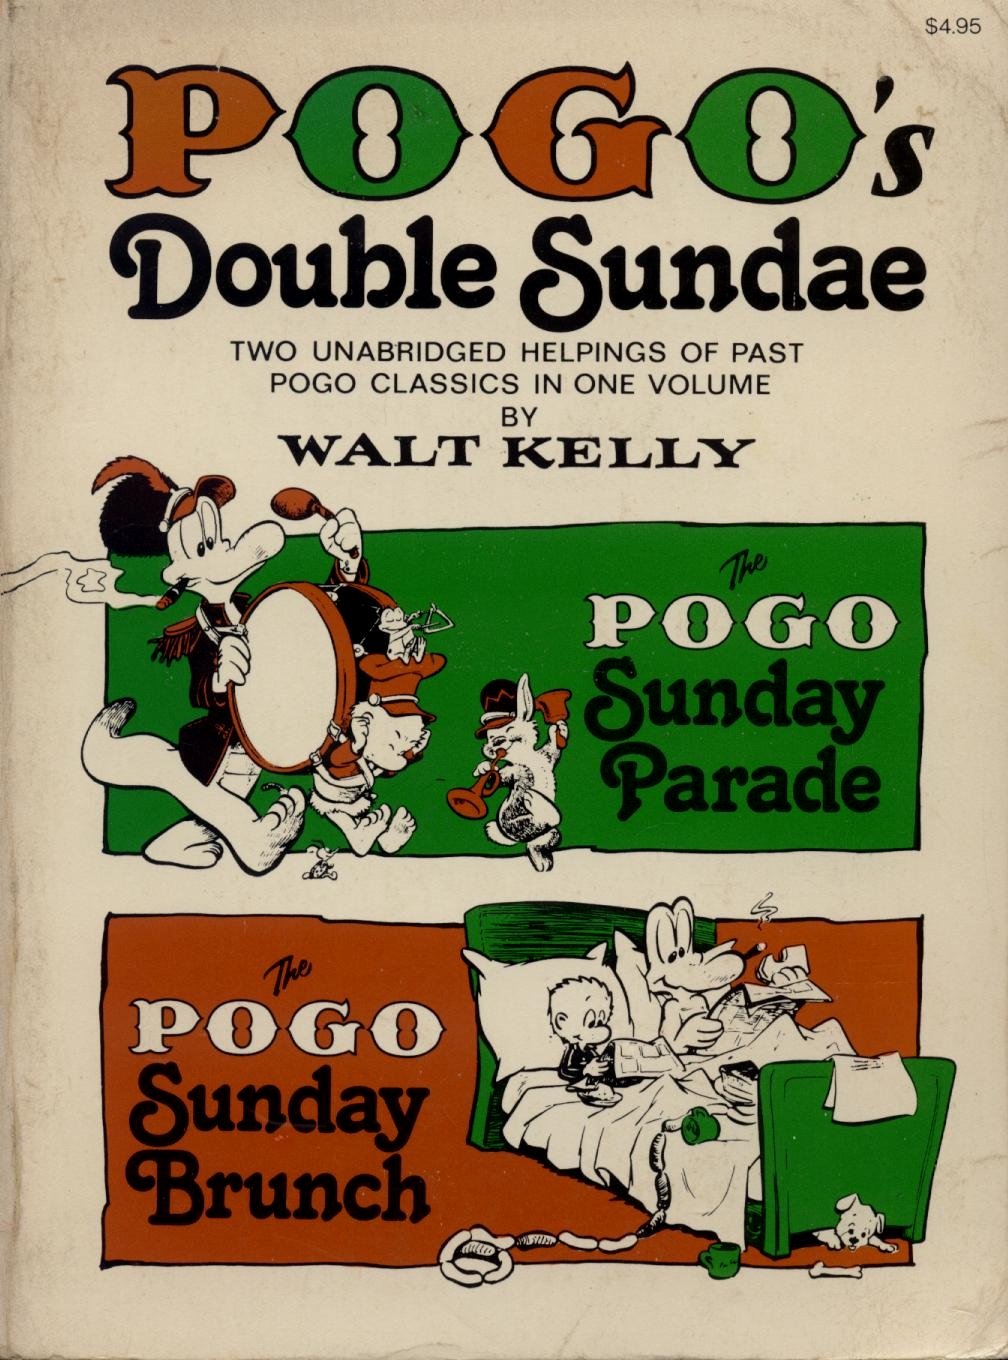 Pogo's Double Sundae: Two Unabridged Helpings of Past Pogo Classics In One Volume - The Pogo Sunday Parade and The Pogo Sunday Brunch by Walt Kelly